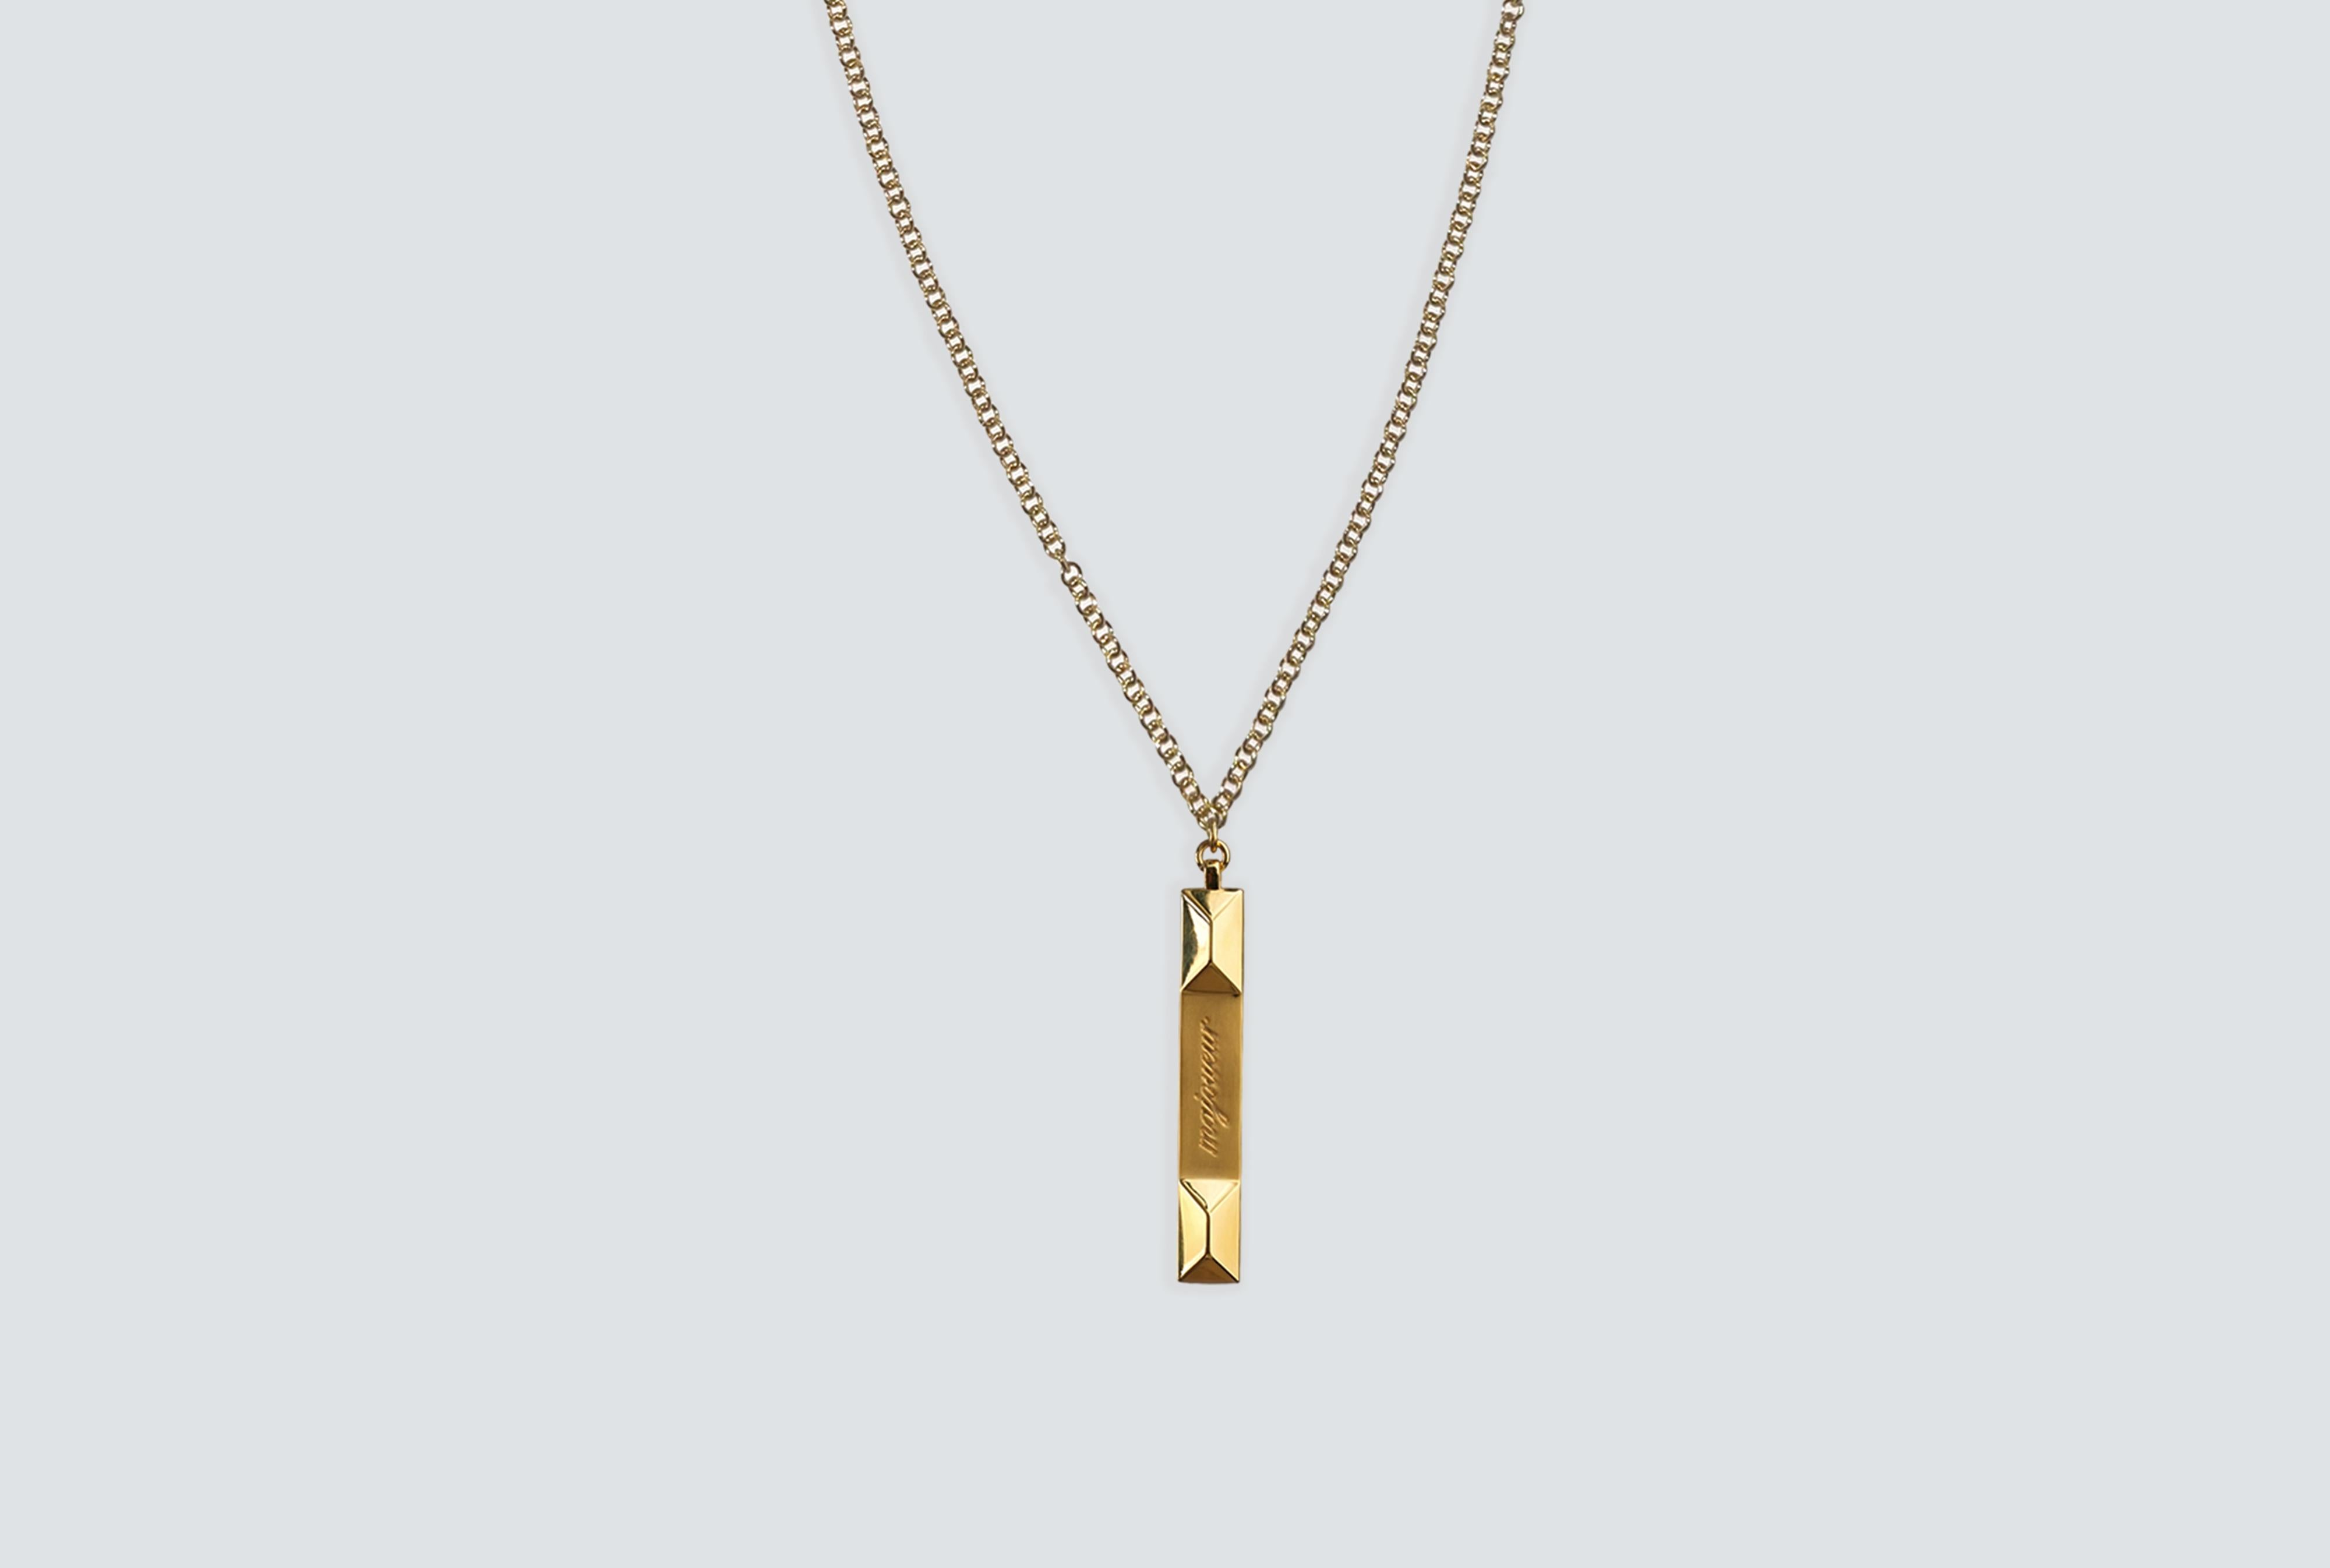 This necklace is truly exceptional and features a unique pendant that represents the essence of our distinctive style. The pendant's design combines bold elements with delicate subtleties, characterized by clean lines and graceful curves. It is